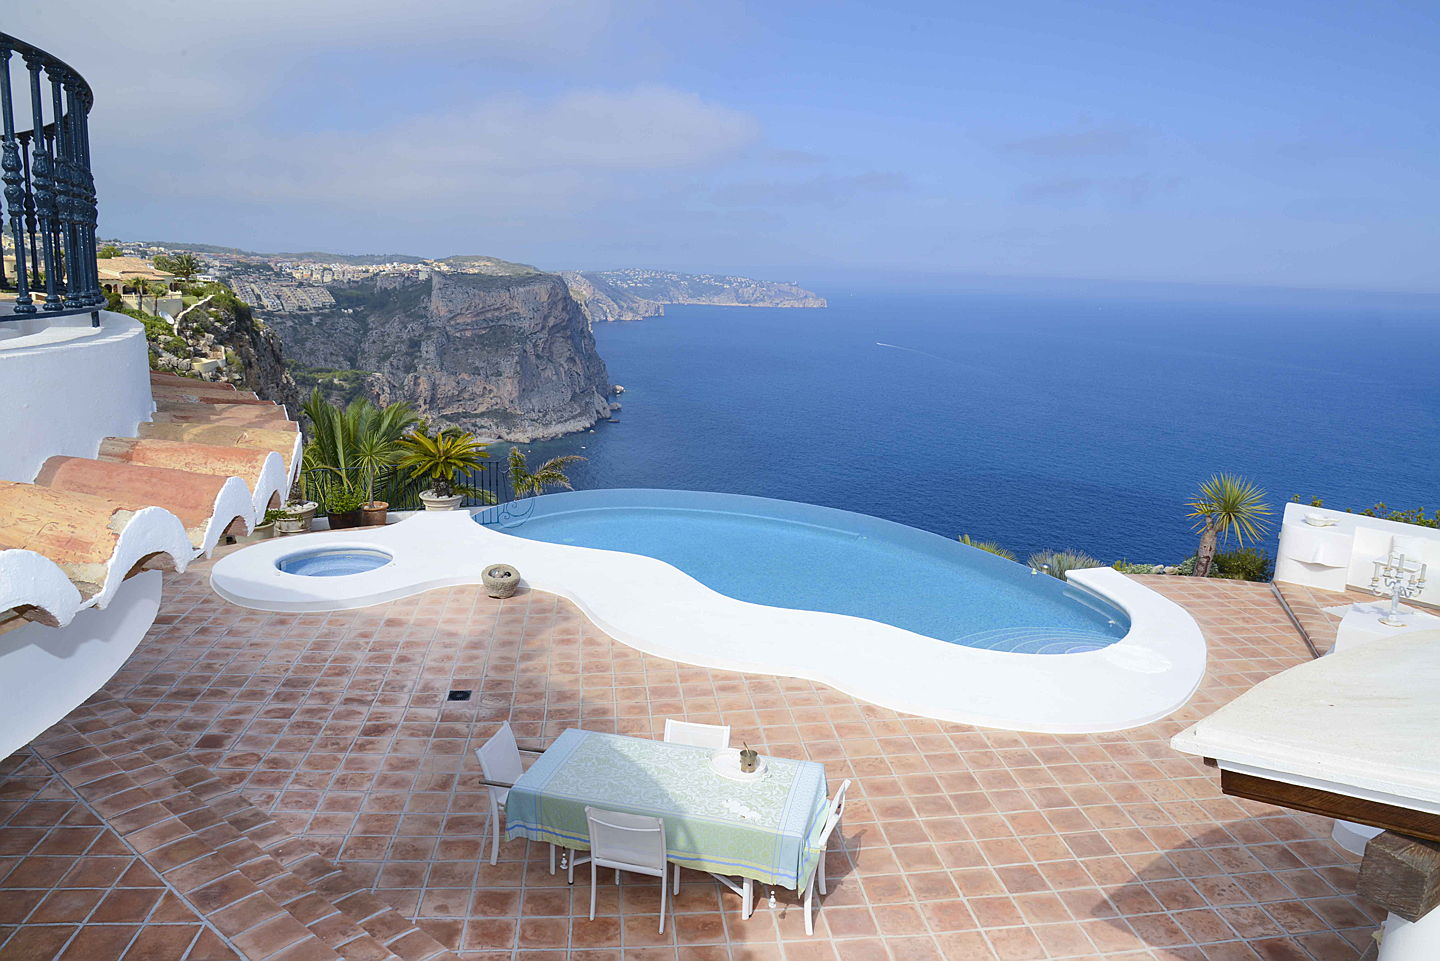  Calpe, Costa Blanca
- This unique villa, the cliff, is situated on the very edge of the coast line with absolutely stunning views. The elegant and luminous luxury villa welcomes us with the mediterranean light flooding in, and from the very entrance you understand that this house is something really special